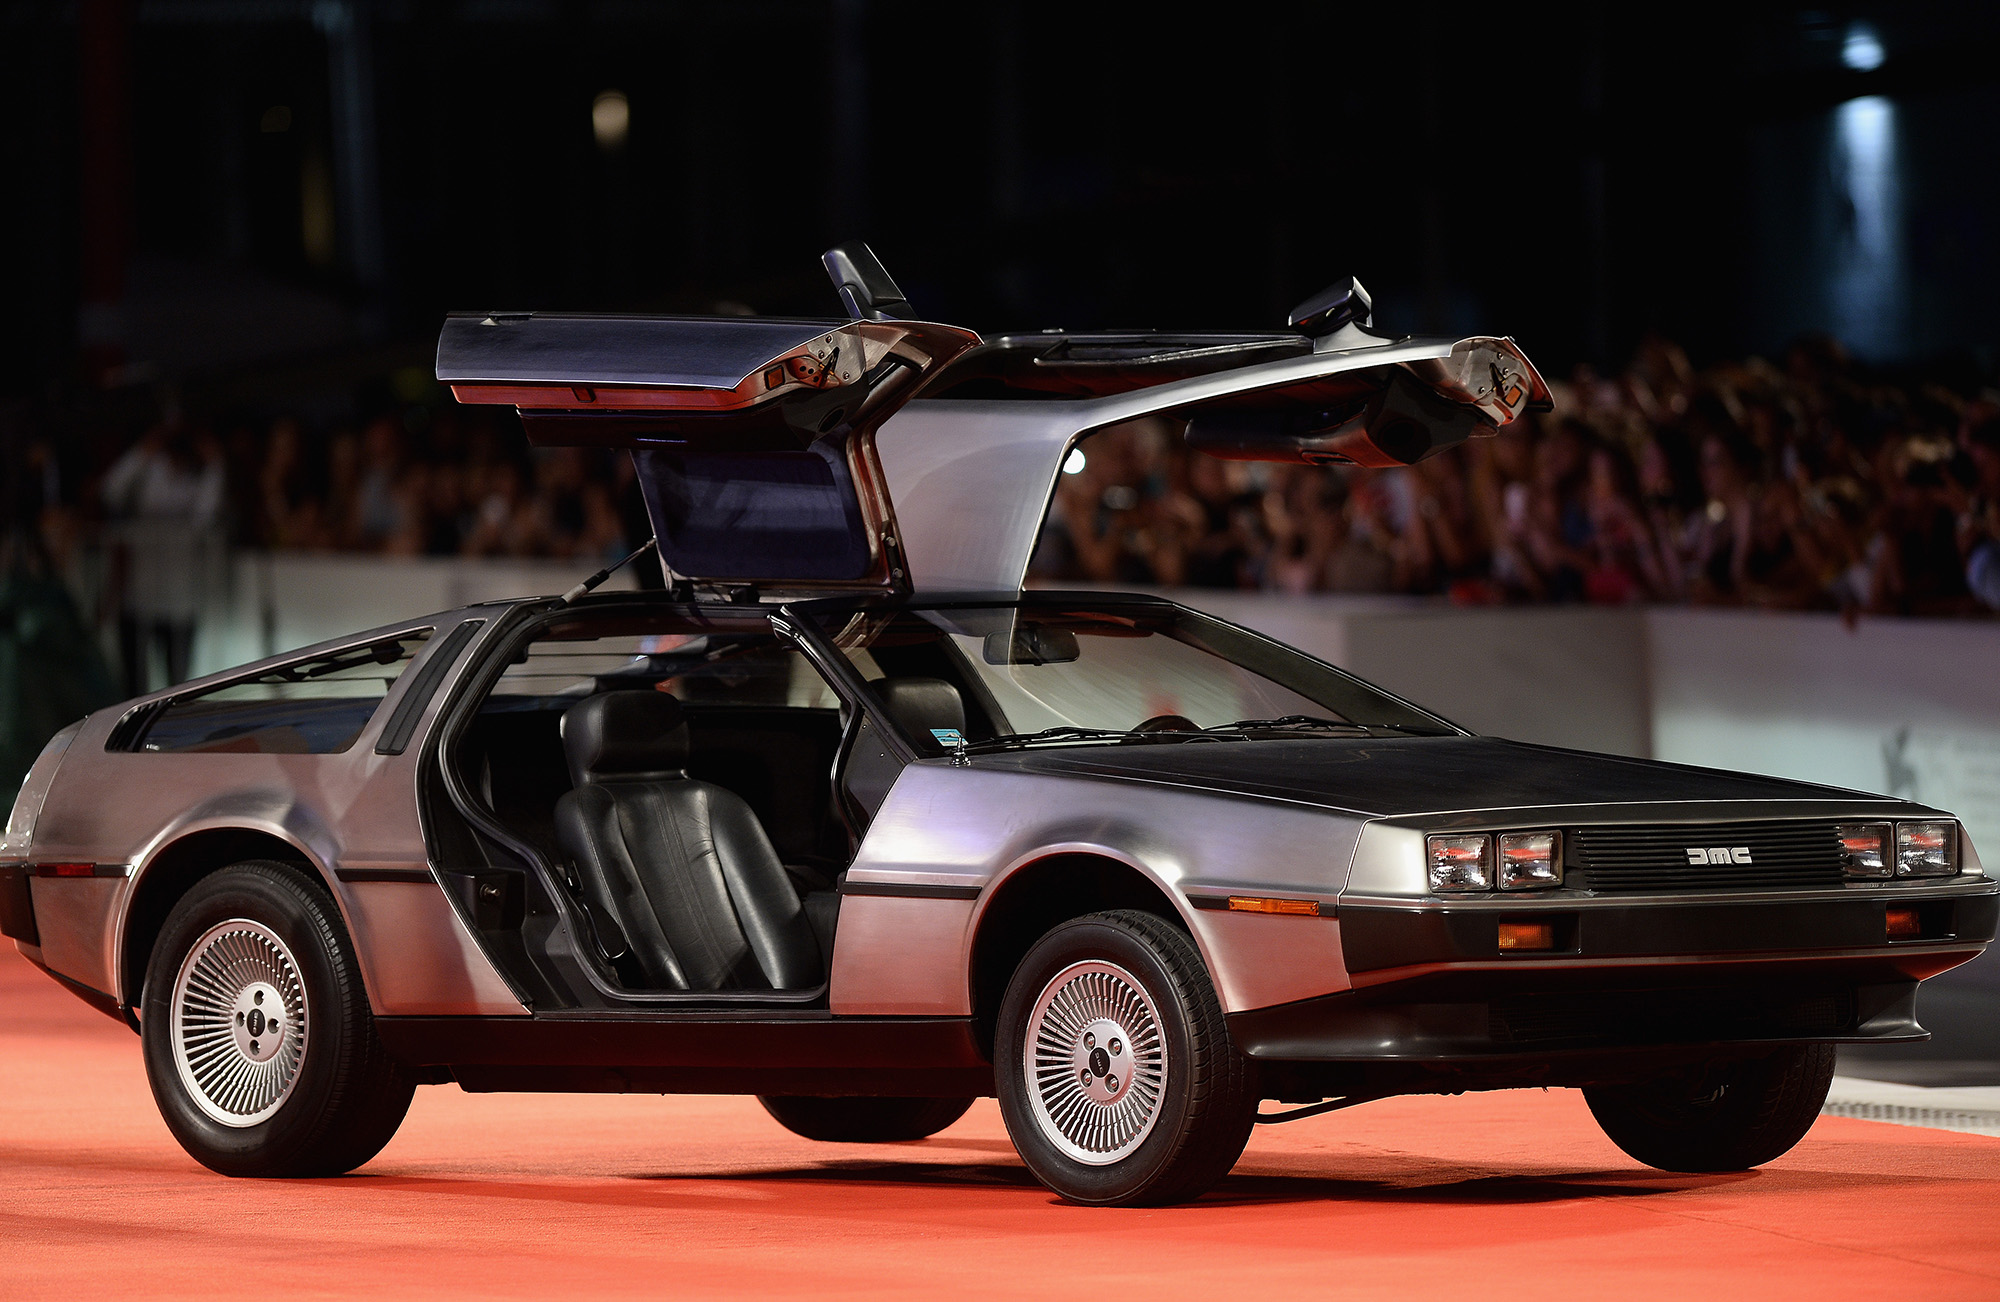 DeLorean Newest Rebrand Is as an Electric Car Bloomberg